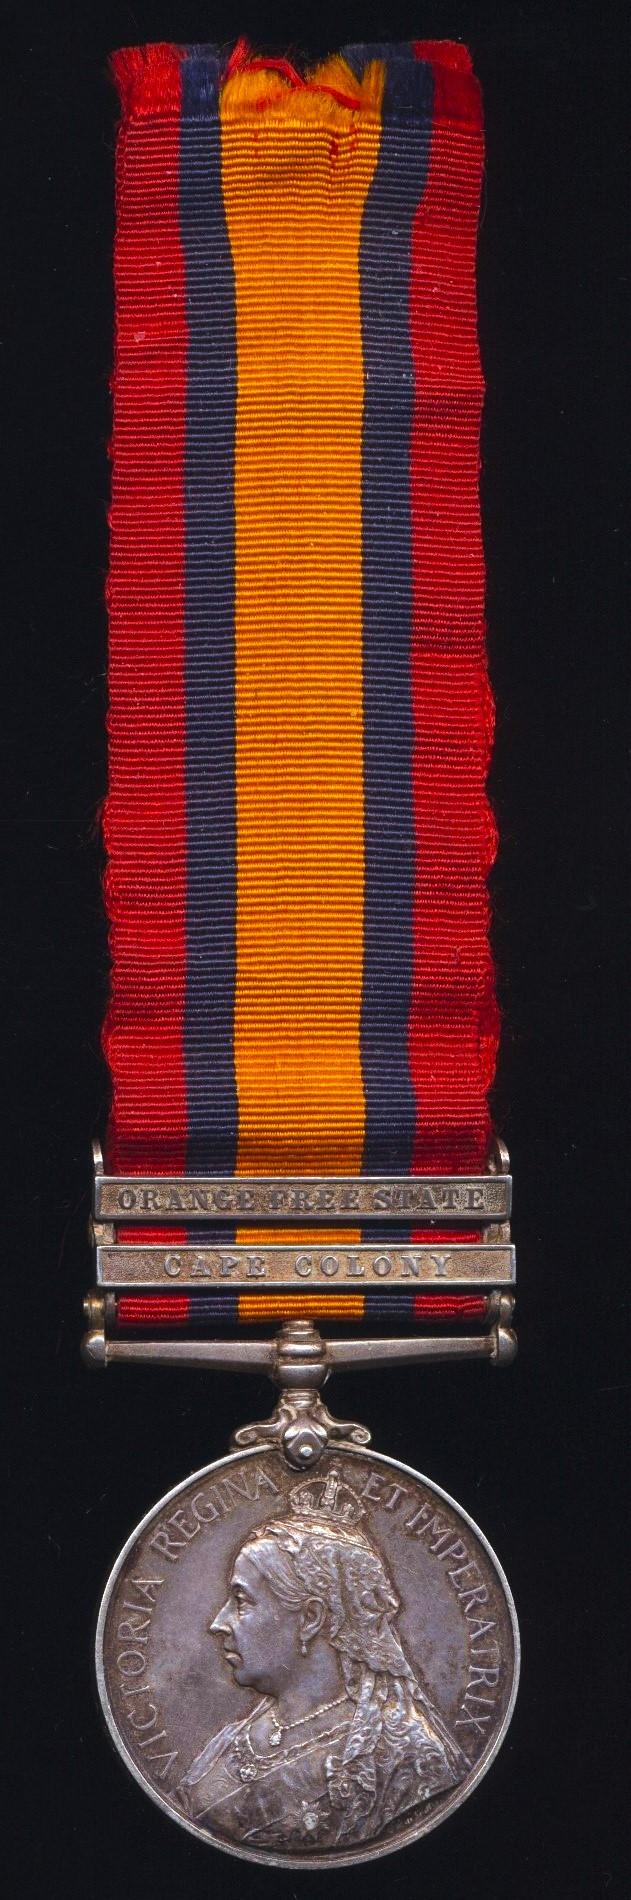 Queen’s South Africa Medal 1899-1902, Silver issue with 2 x clasps, 'Cape Colony', 'Orange Free State' (2699 3rd Cl: Tpr: J. Oxley. S.A.C.)